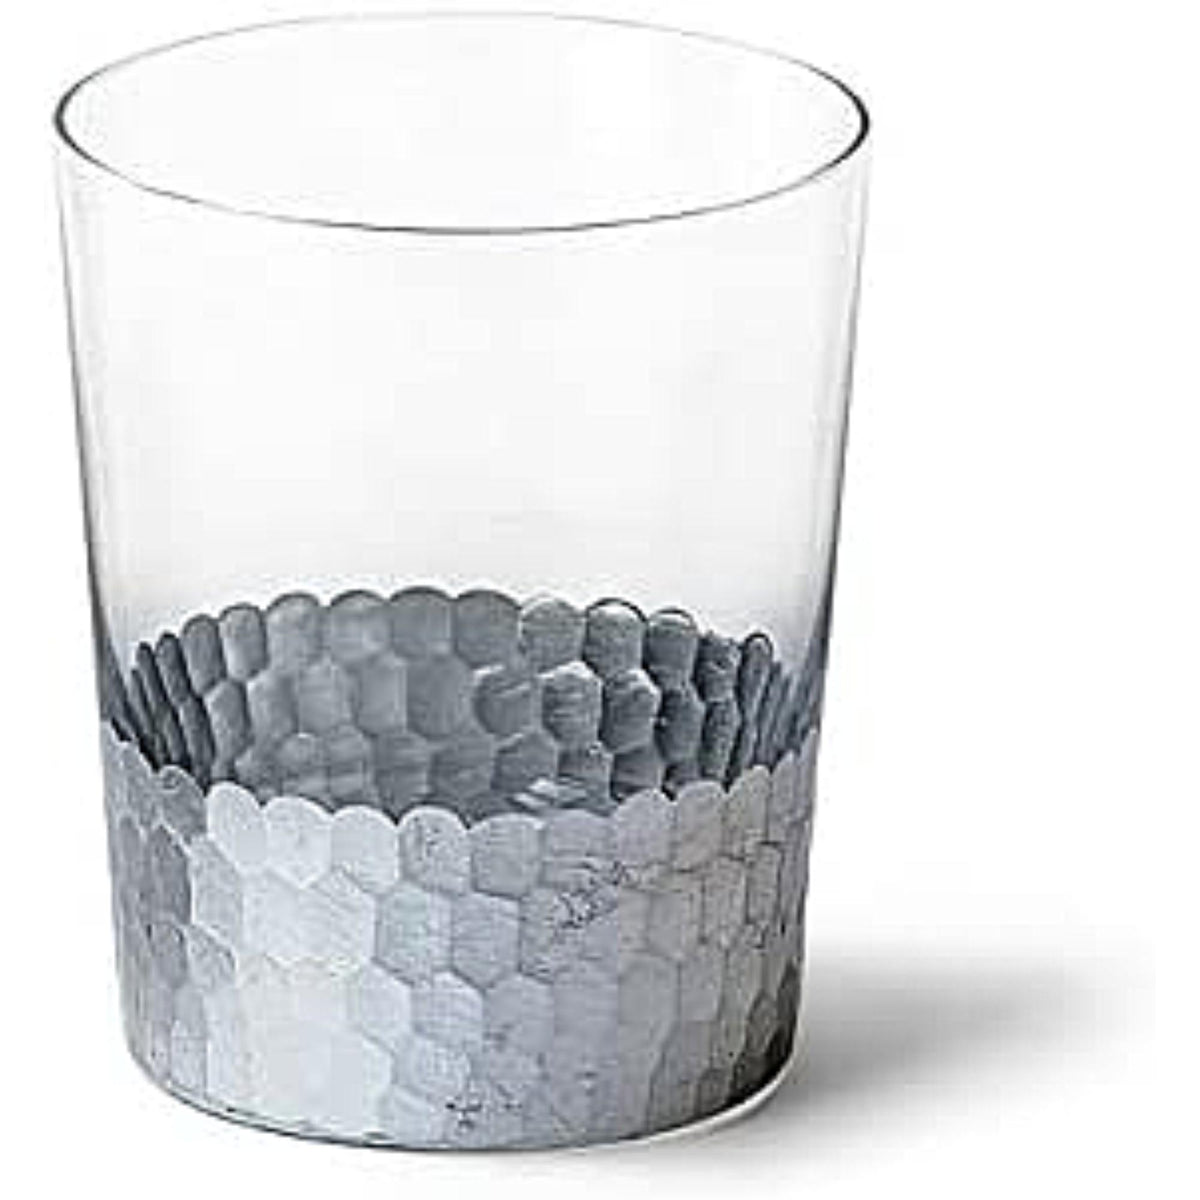 HOSELY® Argea Loral Glass Vase L 4.3 Inch High, Silver Finish